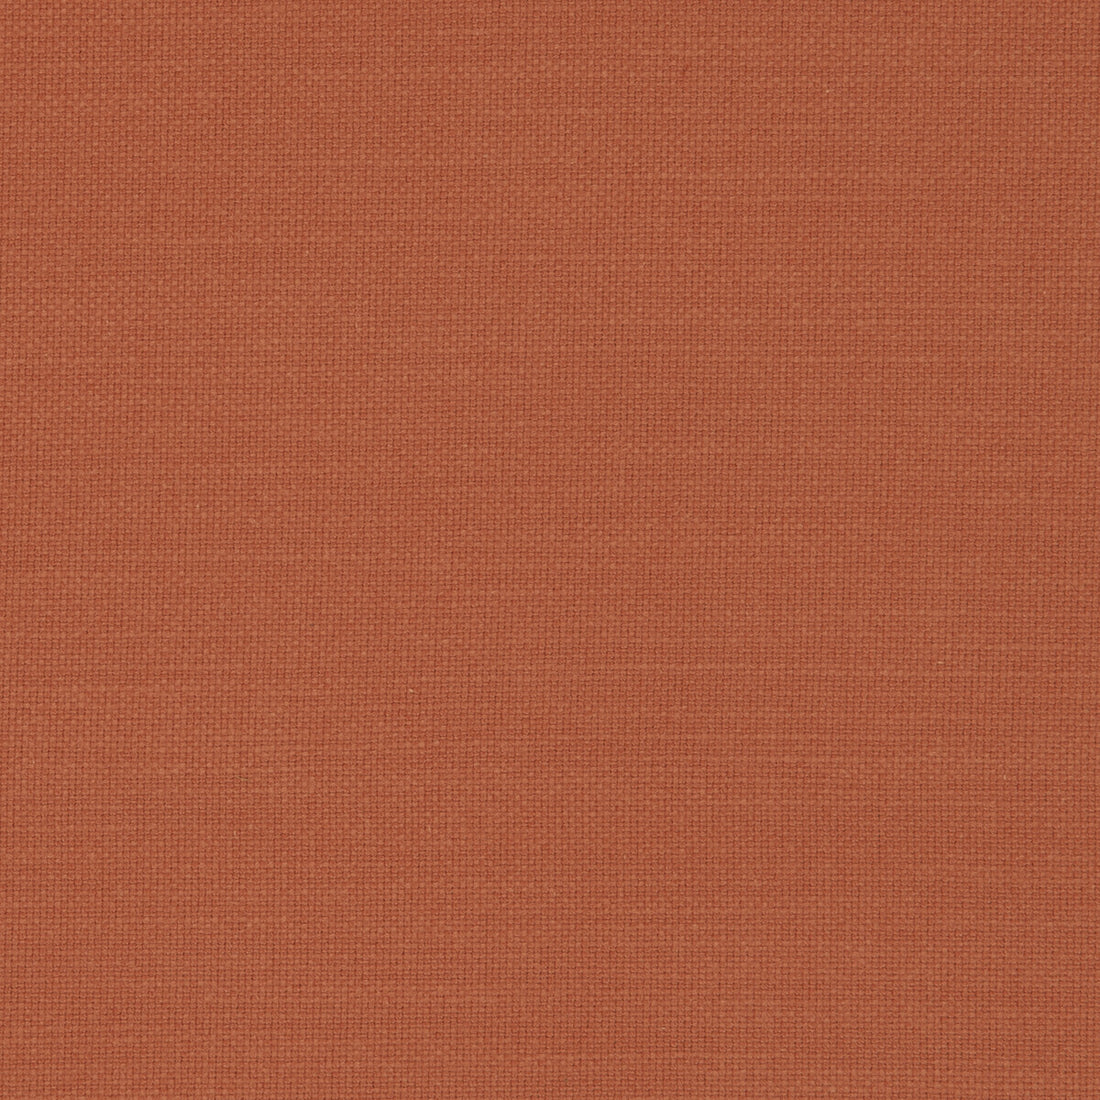 Nantucket fabric in paprika color - pattern F0594/37.CAC.0 - by Clarke And Clarke in the Clarke &amp; Clarke Nantucket collection